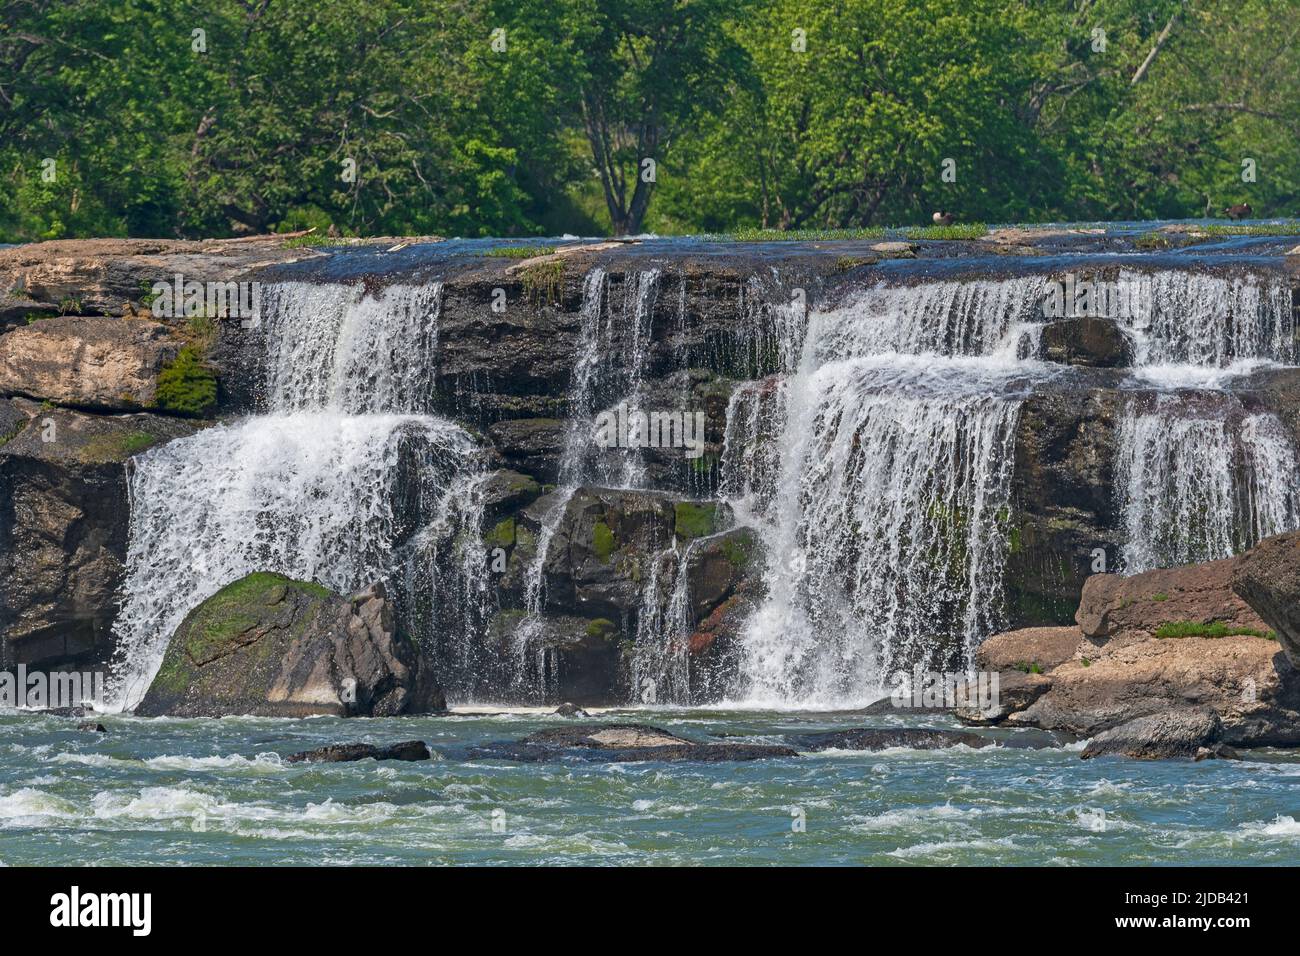 Water Flowing Over the Sandstone at Sandstone Falls on the New River in West Virginia Stock Photo